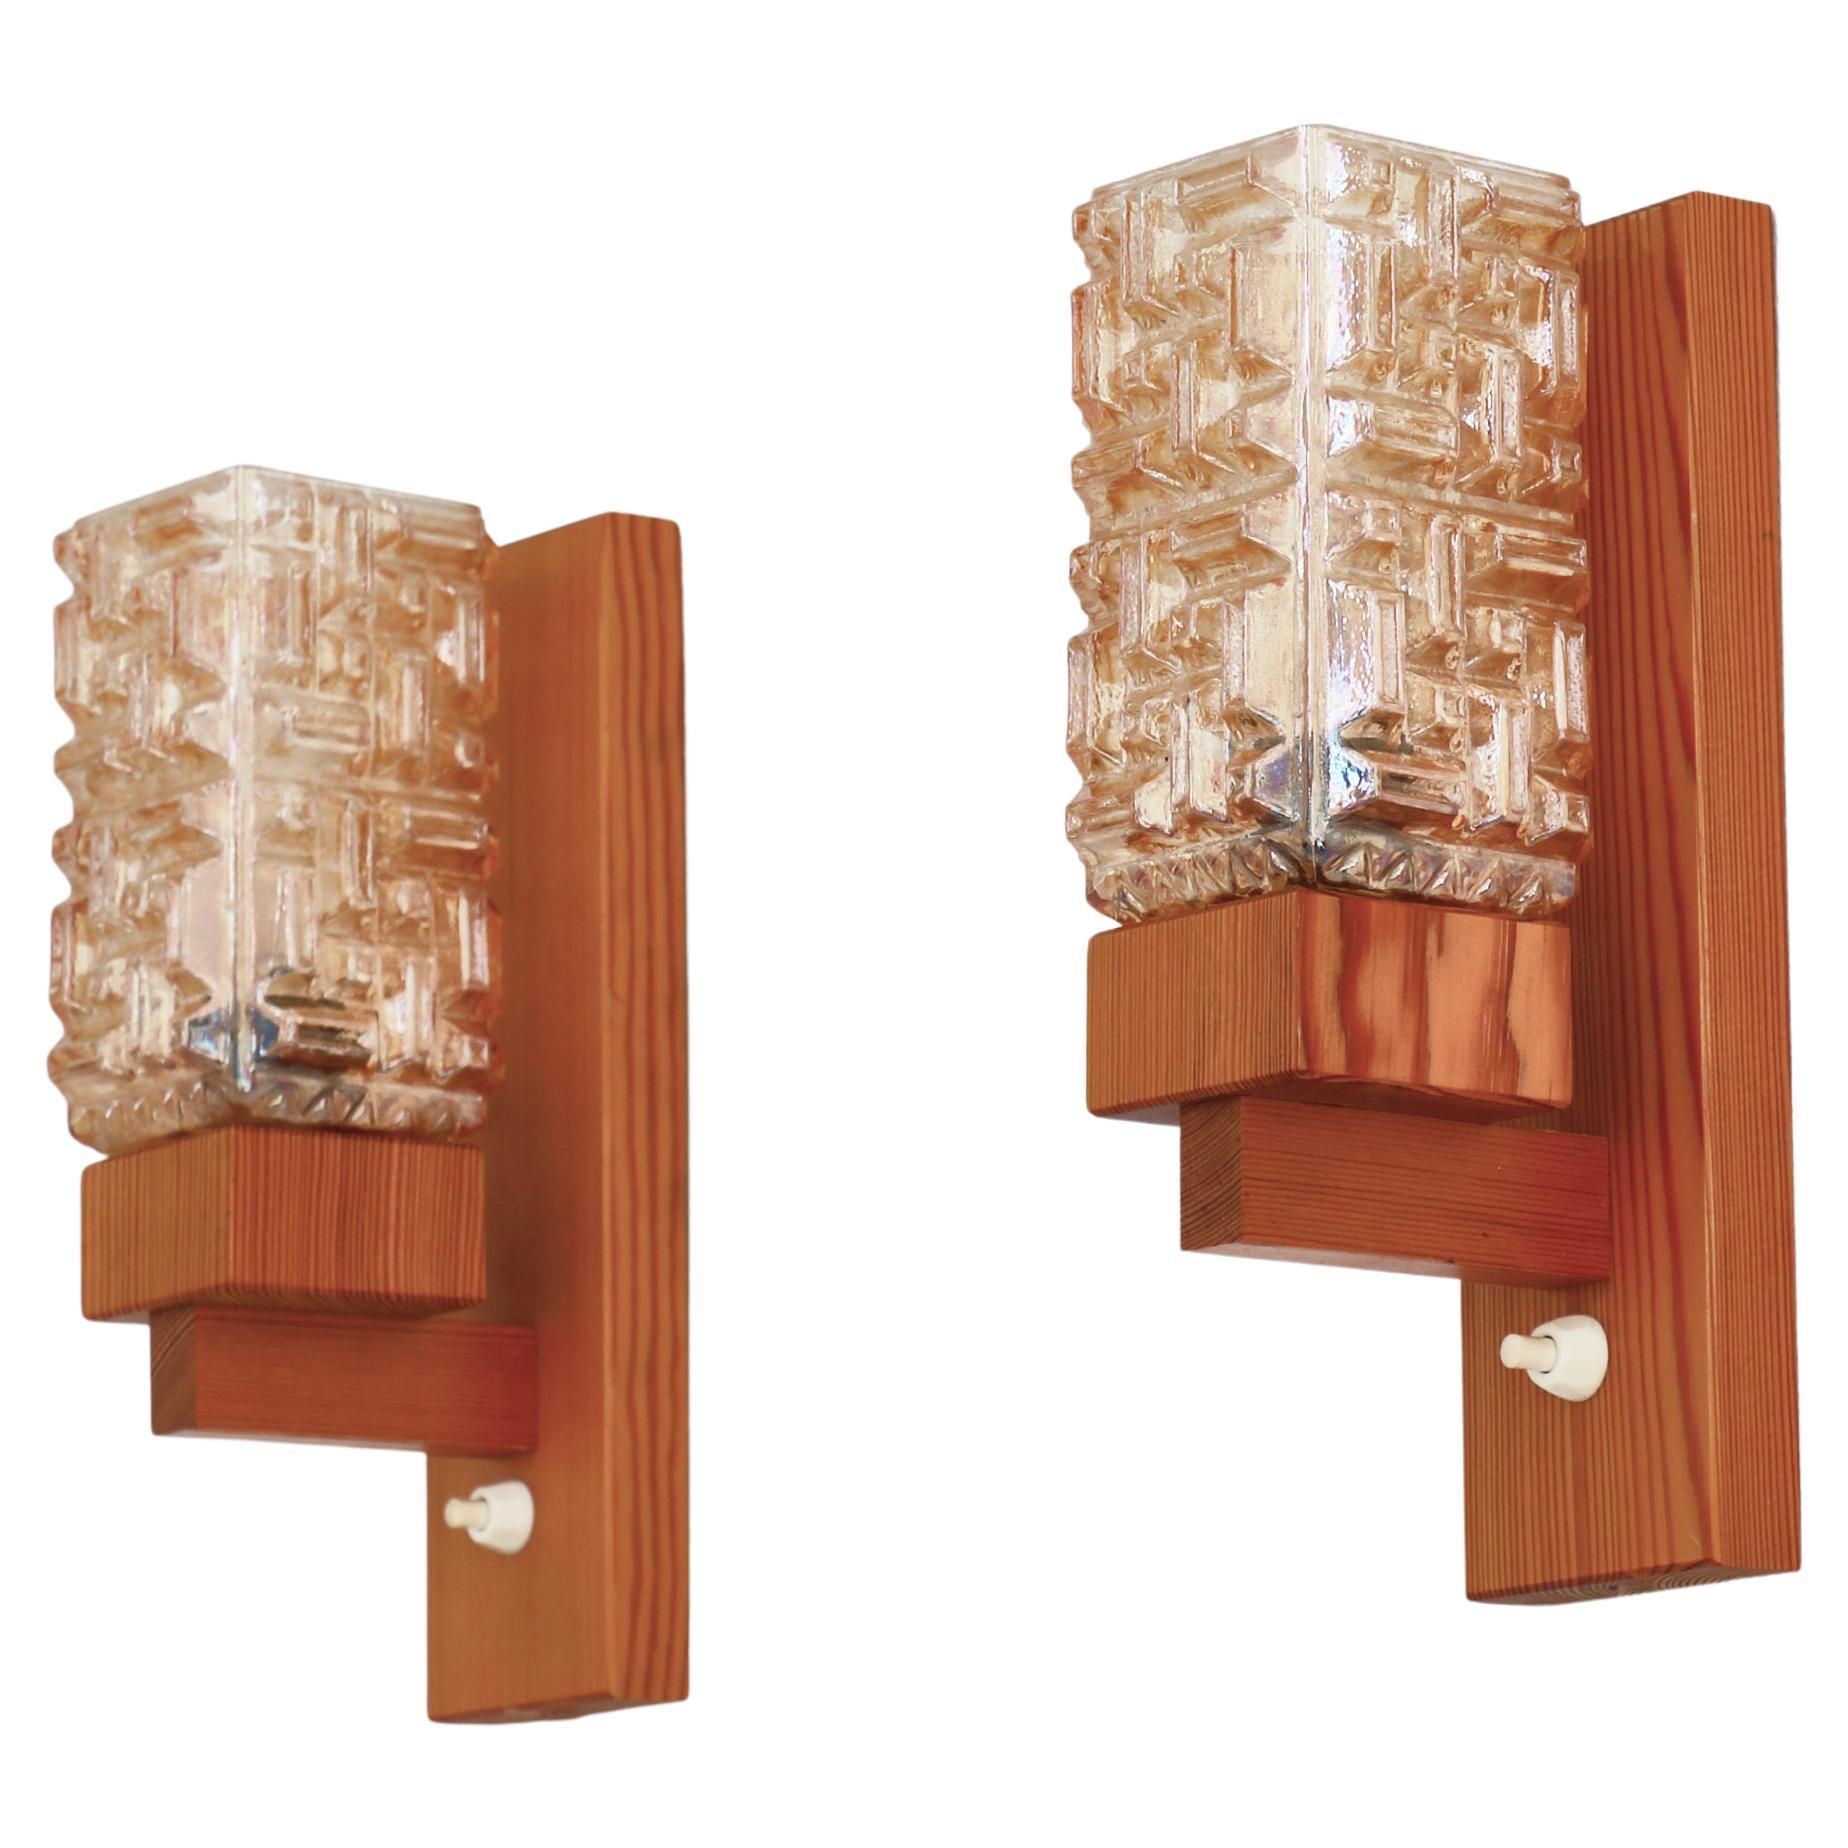 Set of "Vitrika" Wall Lamps in Pinewood & Amber Glass, Denmark, 1970s For Sale